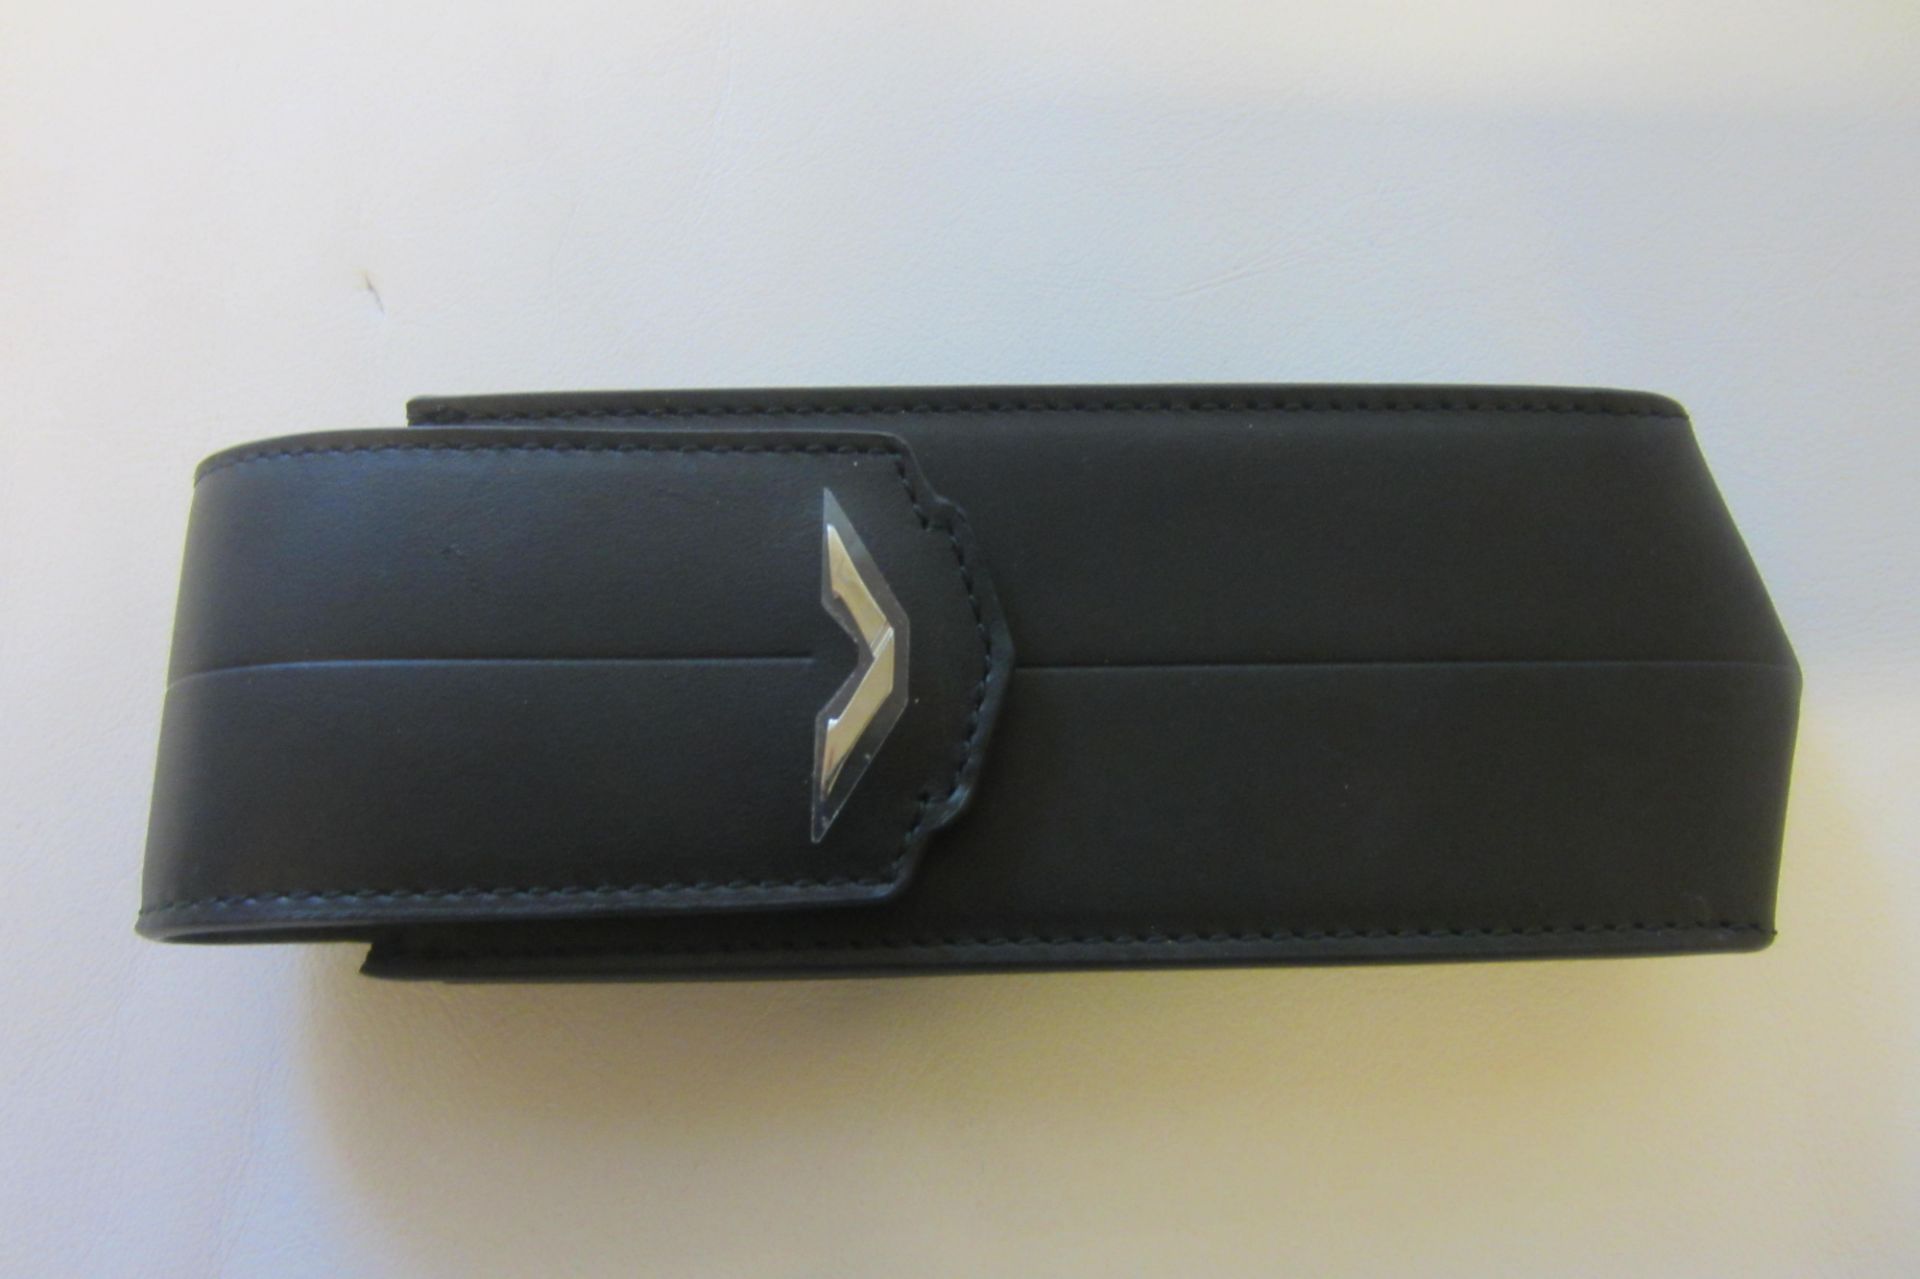 Signature S Black Leather Case with thought to be White Gold "V" Insignia